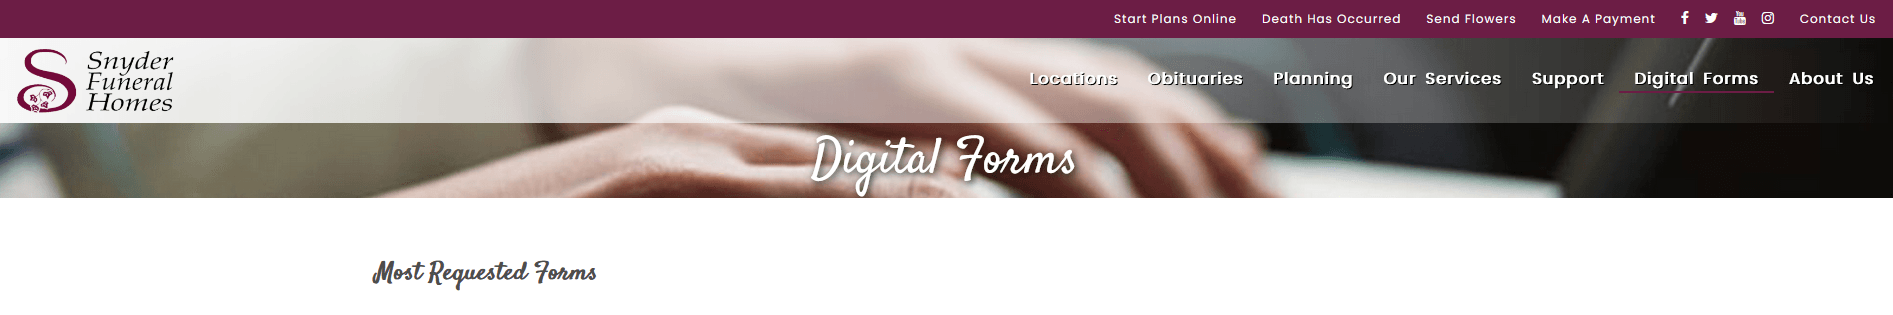 Synder Funeral  Homes digital forms